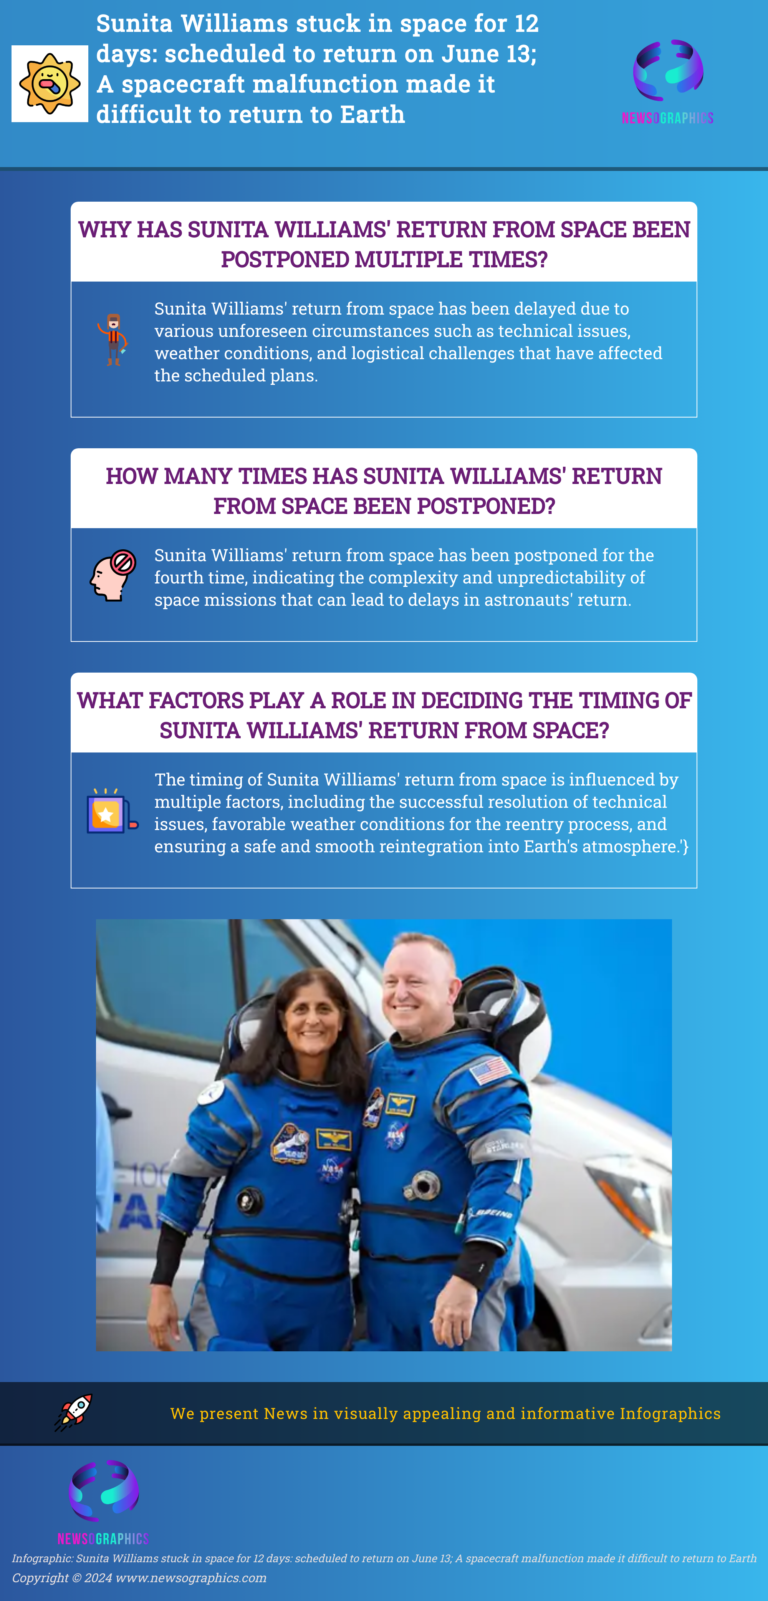 Sunita Williams stuck in space for 12 days: scheduled to return on June 13; A spacecraft malfunction made it difficult to return to Earth